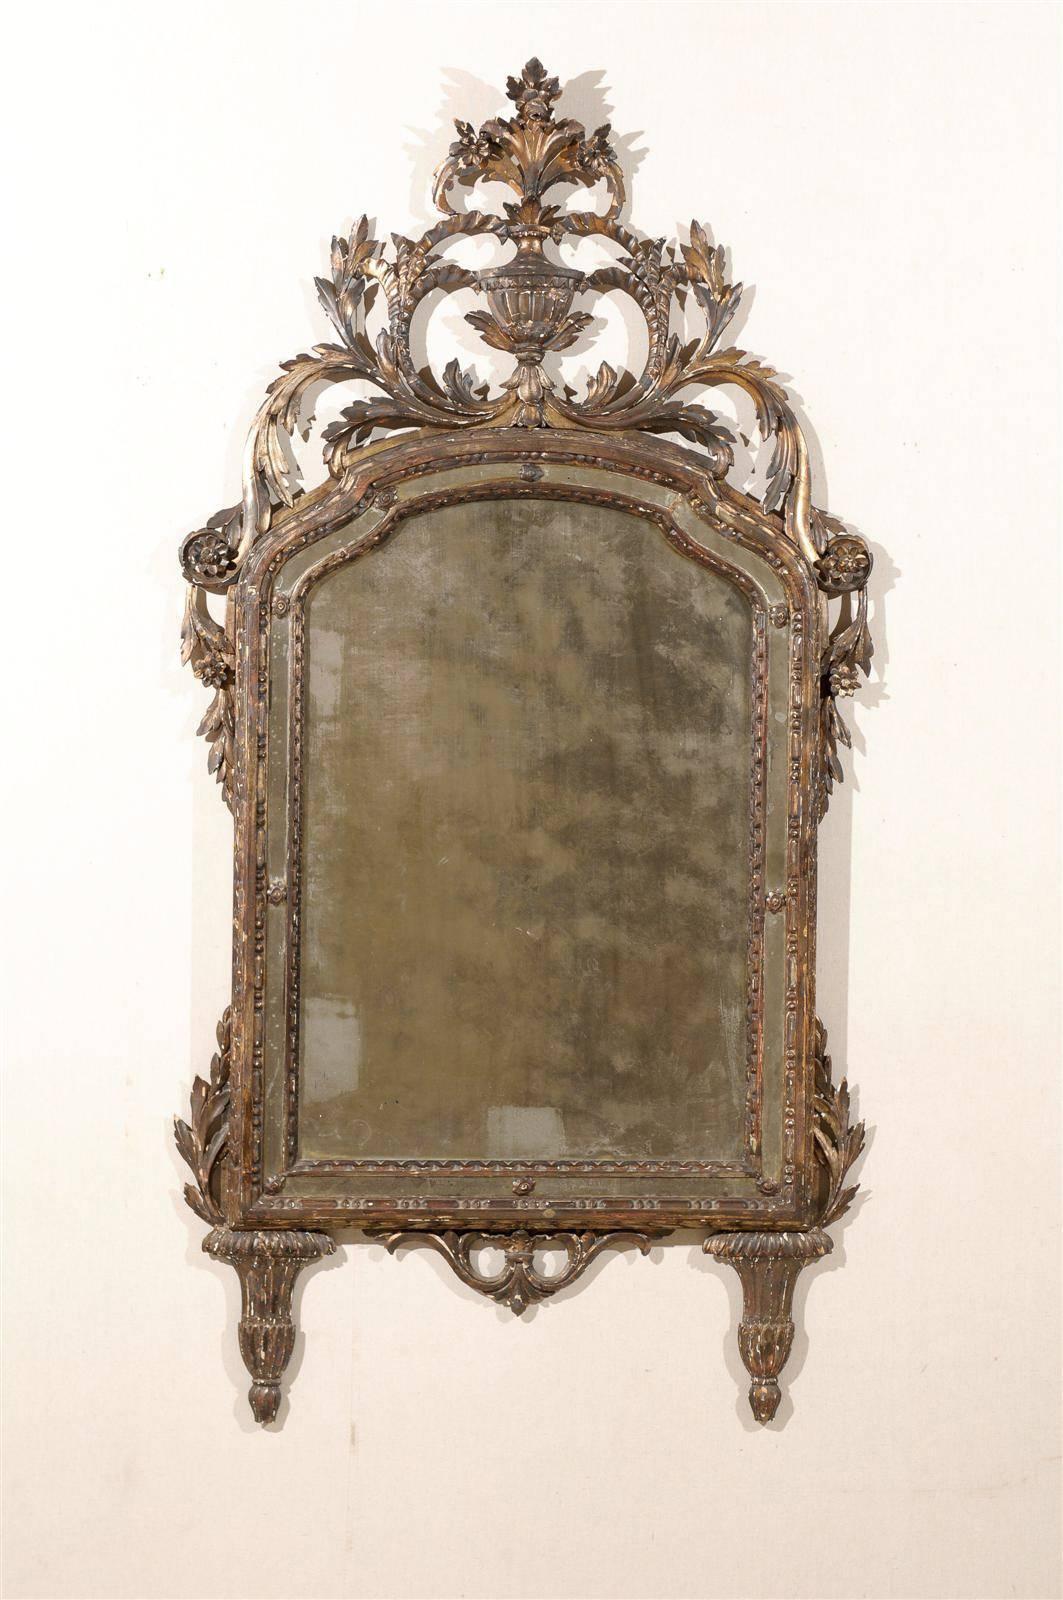 An Italian 19th century wooden mirror with traces of gilding and beautifully carved crest featuring an urn and flowers. Beyond the first wooden molding around the central mirror, panels of glass form another layer in the frame.

  